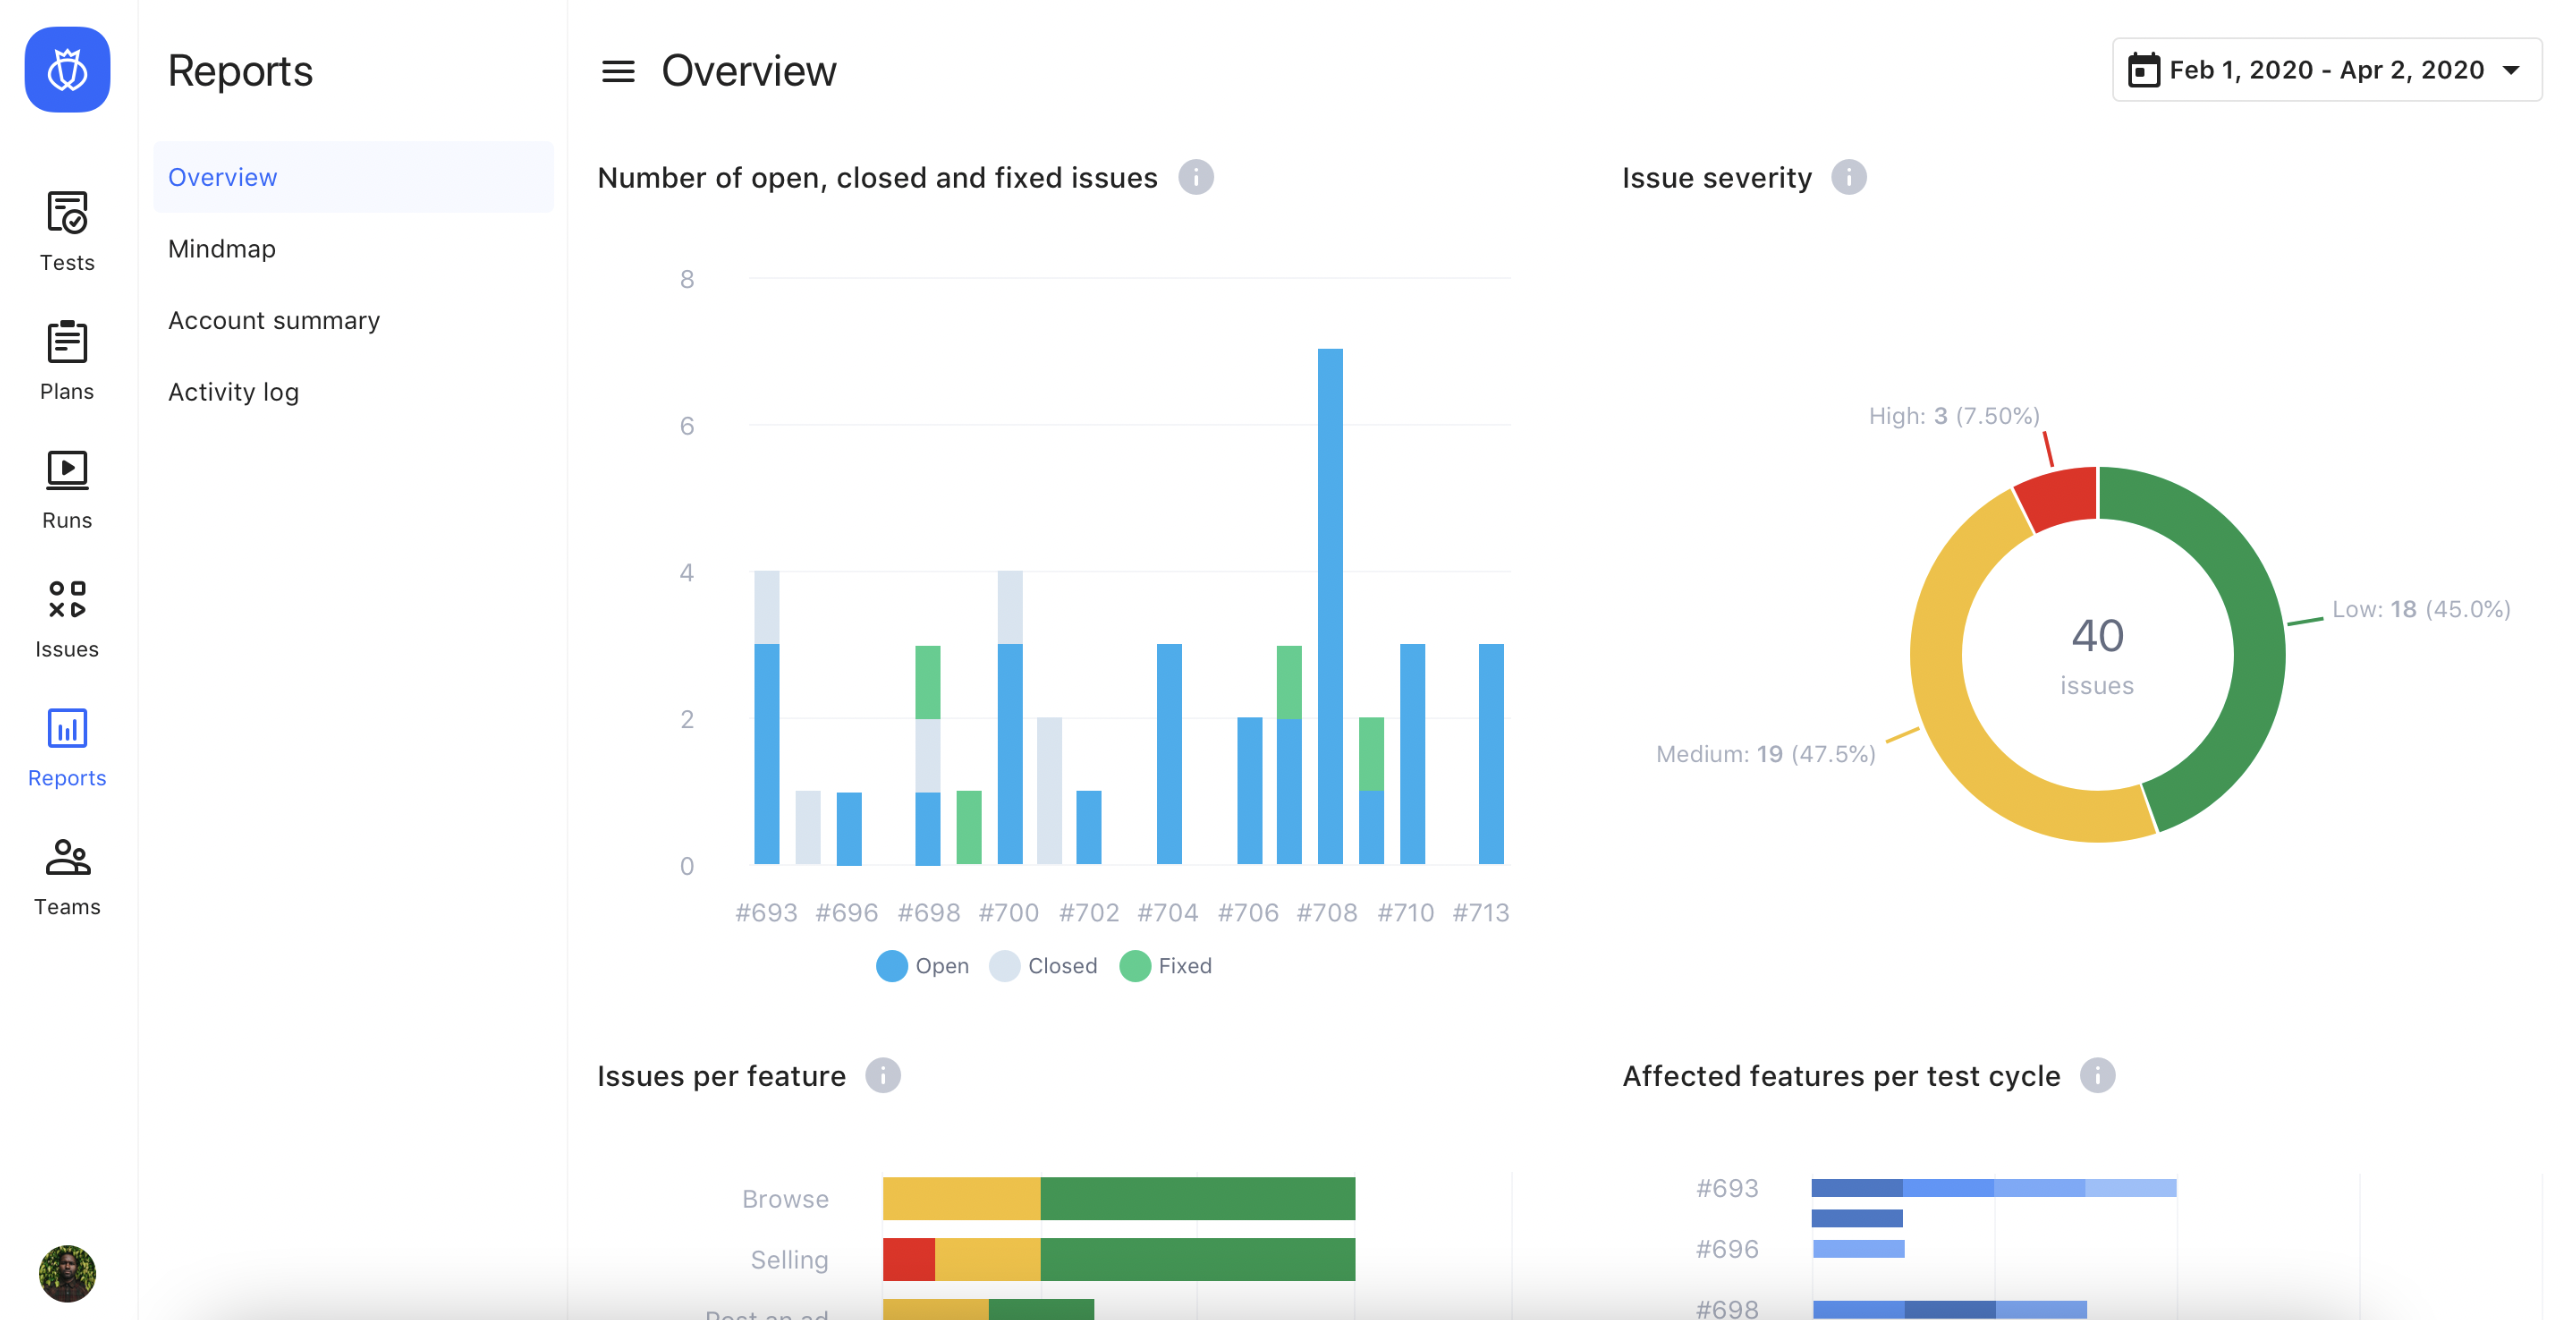 Do you need traceable, transparent and clear reporting? Testlio’s Reports Module lets you trace and track everything. Essential data is accessible and enlightening. And you can create visual charts to see issue heat maps for rapid insights.